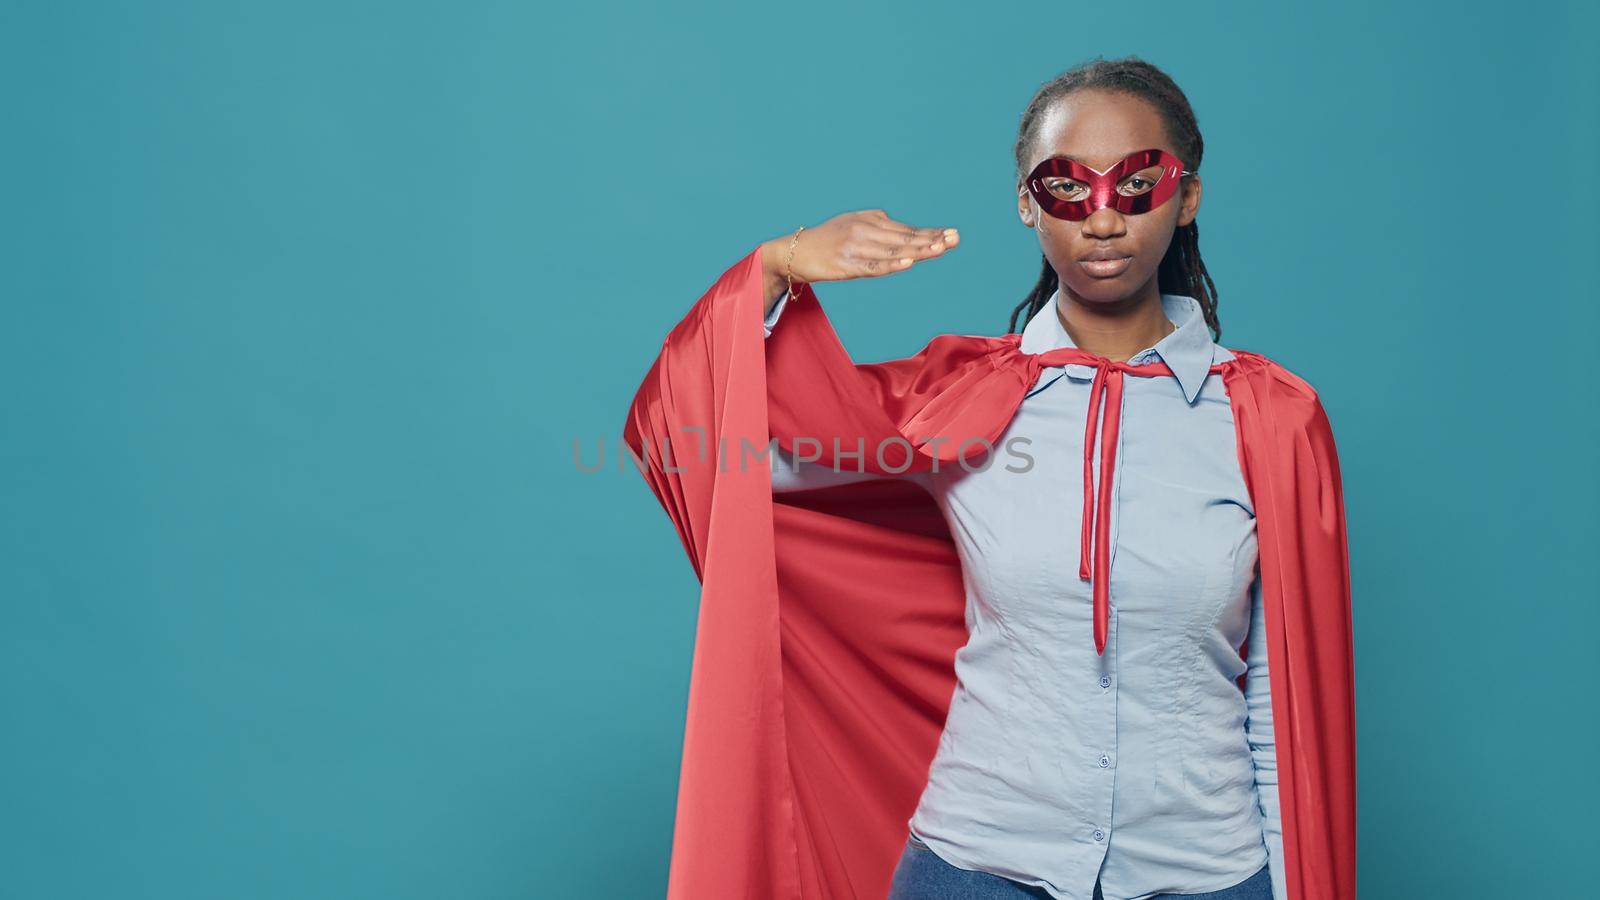 Portrait of woman superhero doing military salute to show motivation and respect. Wearing hero costume with red cape and mask, feeling confident and powerful over blue background in studio.